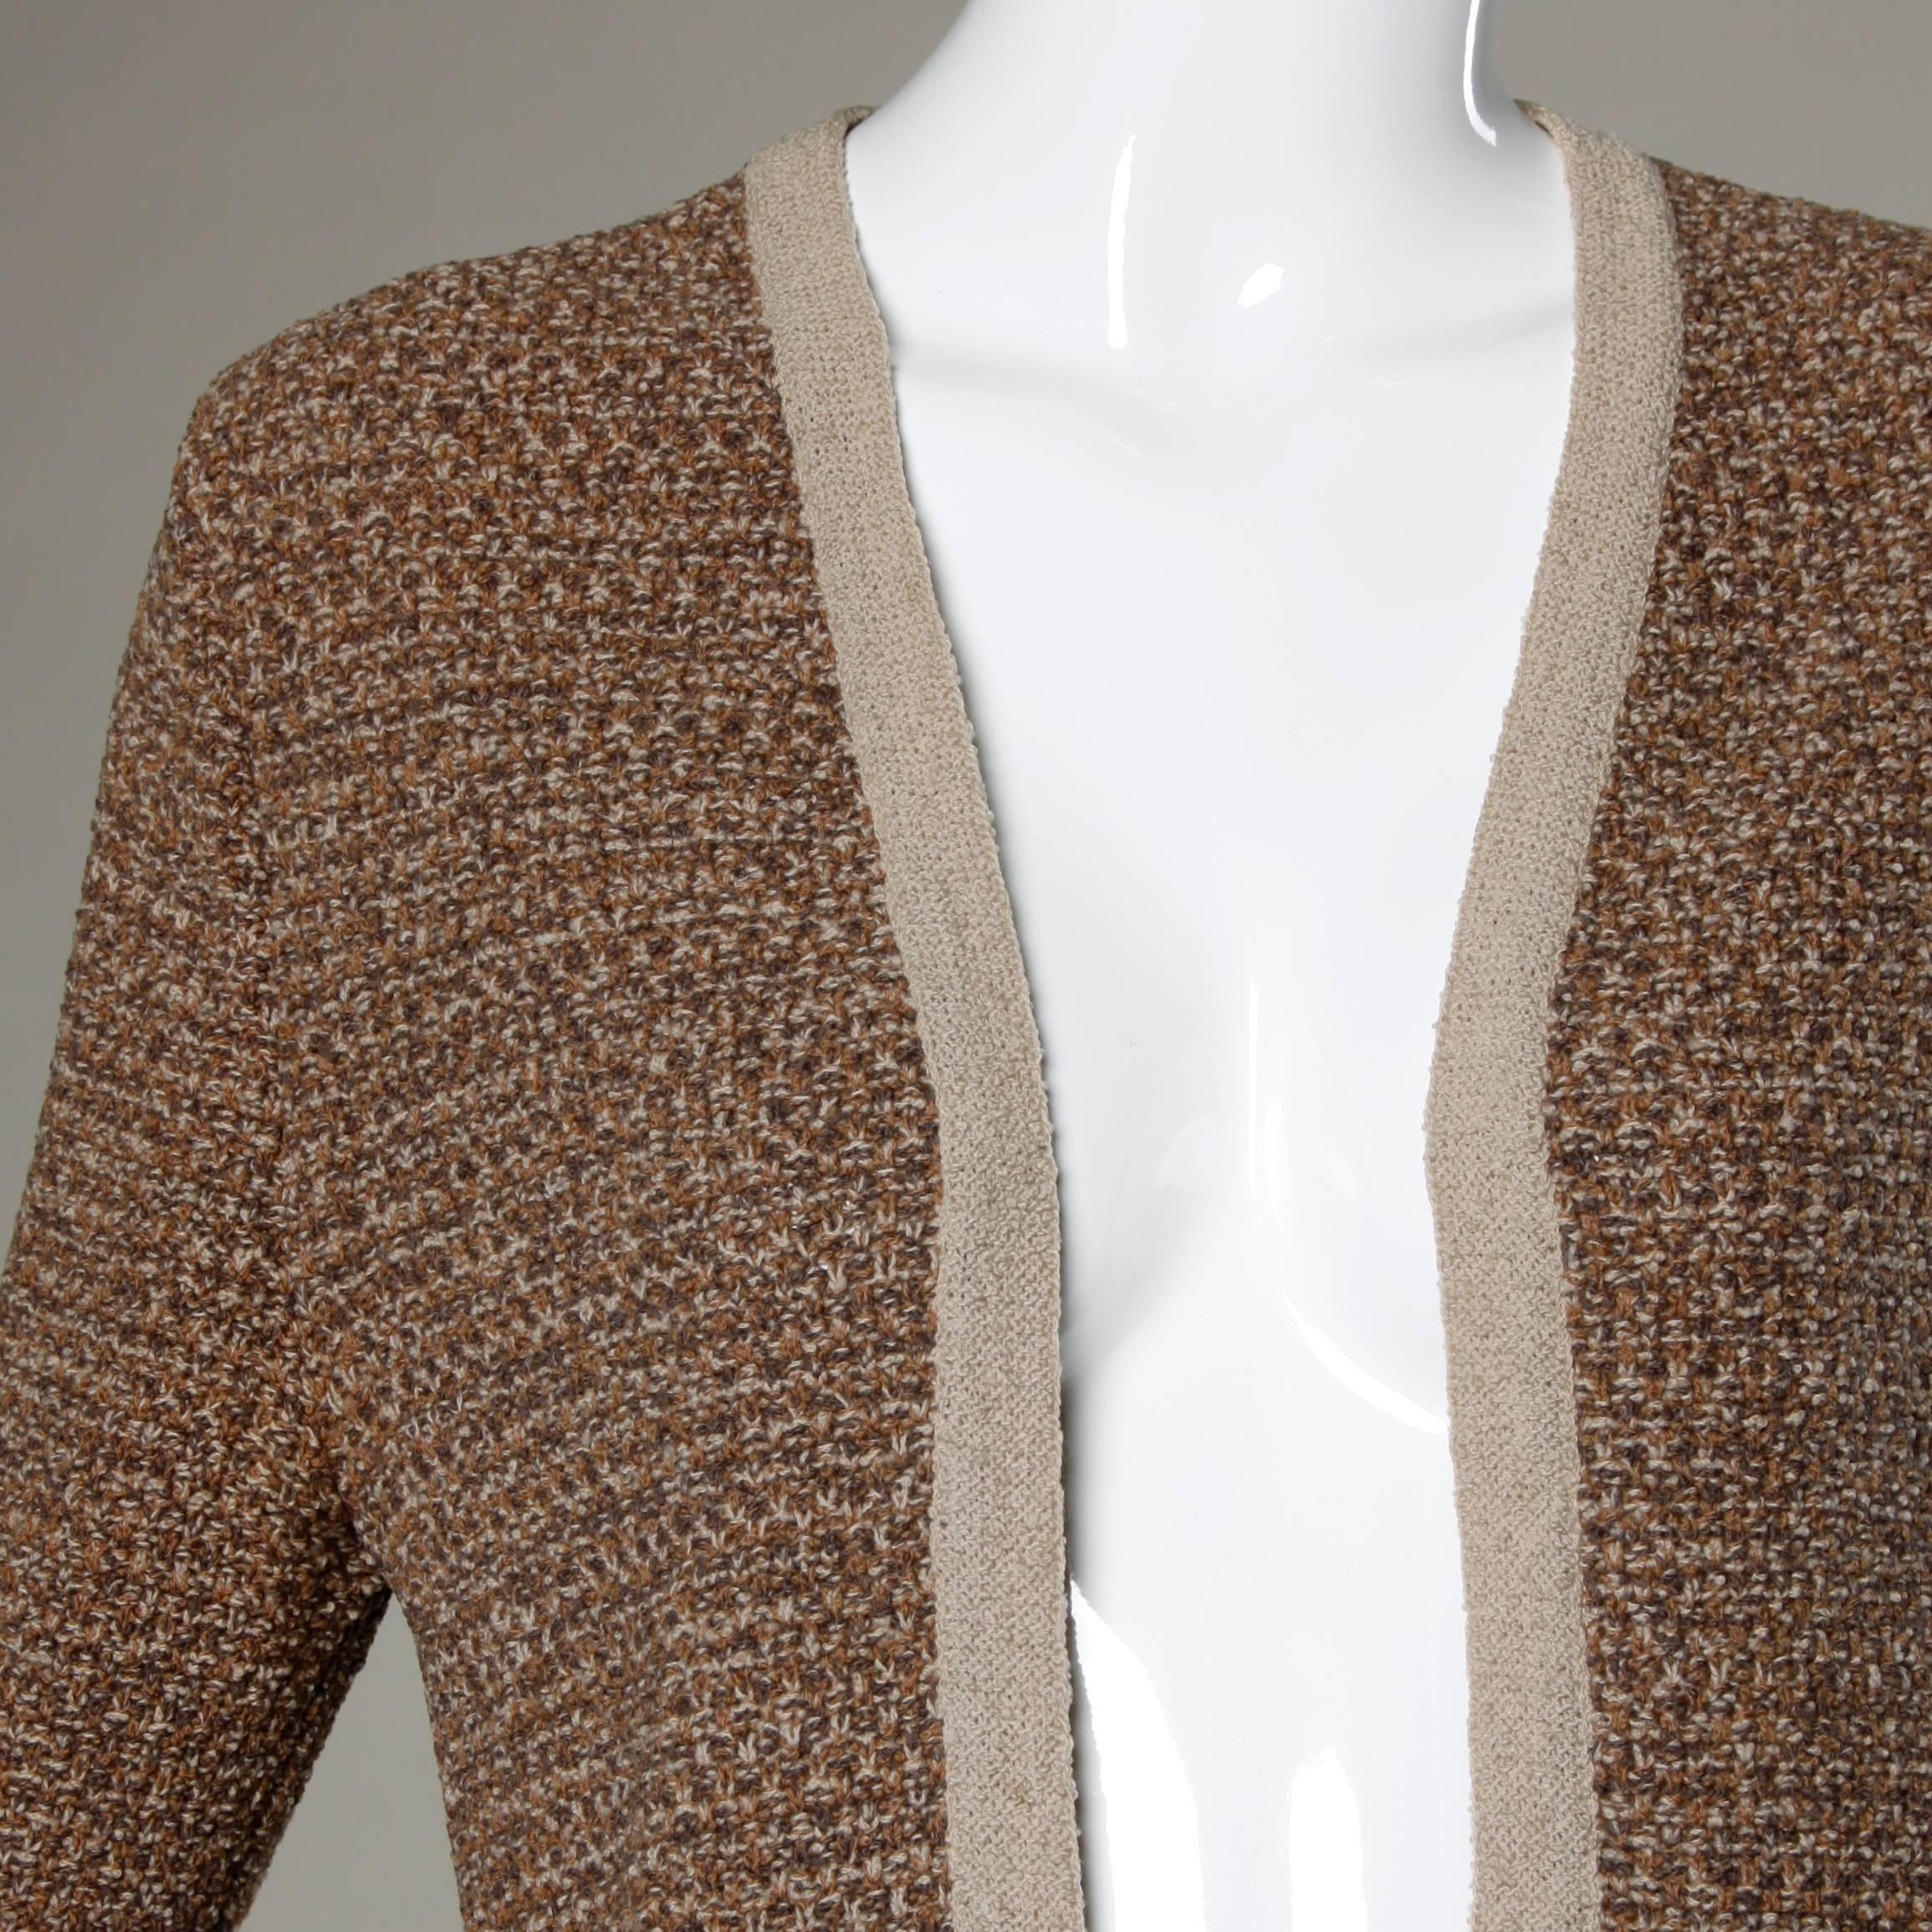 Early Bonnie Cashin vintage knit cardigan sweater.

Details:

Unlined
Front Pockets
No Closure 
Marked Size: Not Marked
Estimated Size: Medium
Color: Tan/ Brown/ Dark Brown
Fabric: Not Marked/ Feels like Wool
Label: Bonnie Cashiu Design/